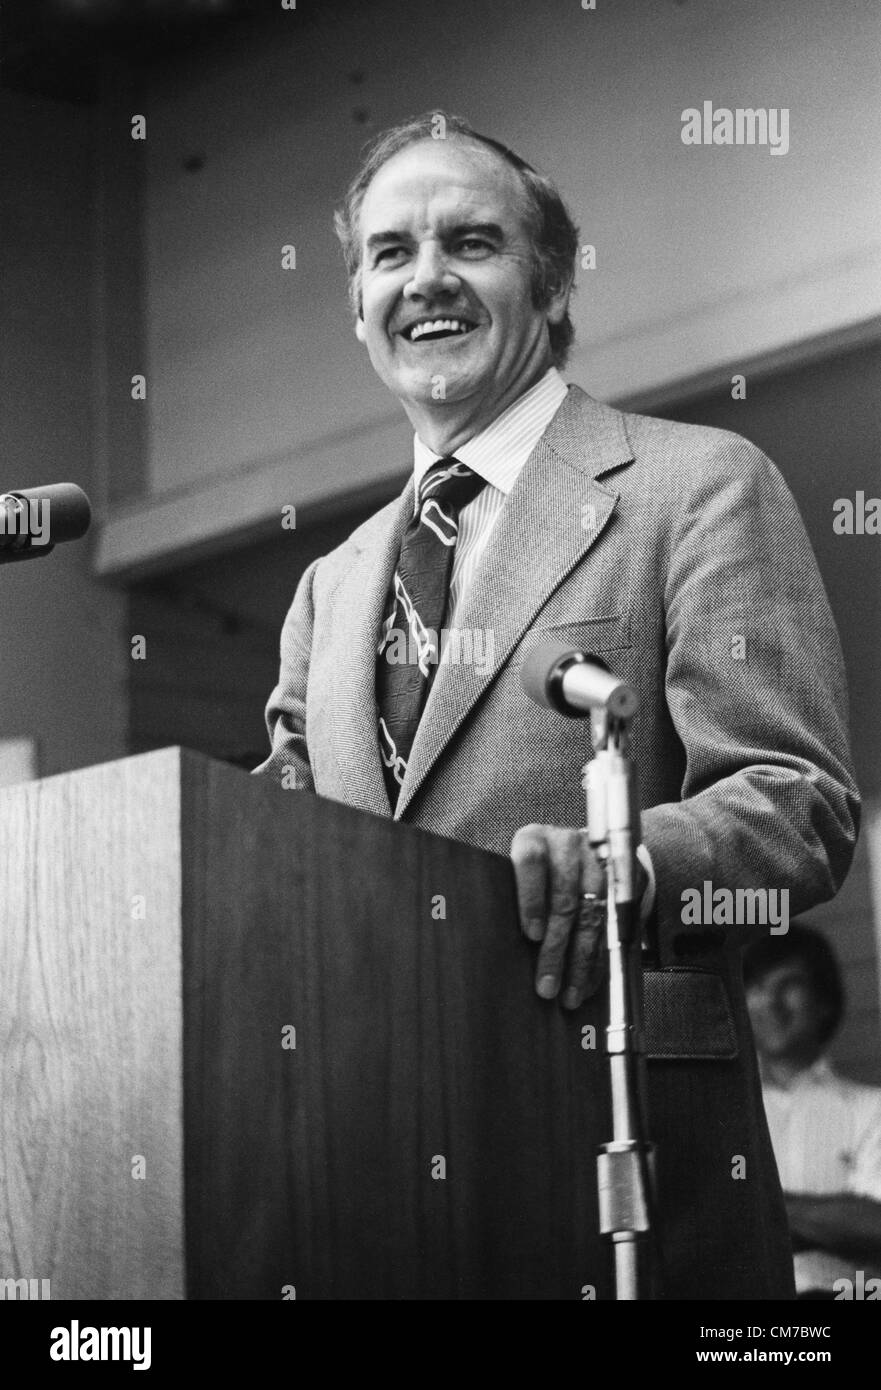 George McGovern, a decorated WWII bomber pilot who represented South Dakota in the House and the Senate, campaigned against U.S. involvement in Vietnam in his 1972 Democratic bid for the presidency and lost in a landslide to Richard M. Nixon, died Sunday Oct. 21, 2012. He was 90. PICTURED: Sep. 04, 1972 - Pleasanton, California, U.S. - Senator GEORGE MCGOVERN made his first appearance in California since his June Primary victory. He visited the Alameda County Labor Day Picnic at the fairgrounds.  (Credit Image: © KEYSTONE Pictures USA/ZUMAPRESS.com) Stock Photo